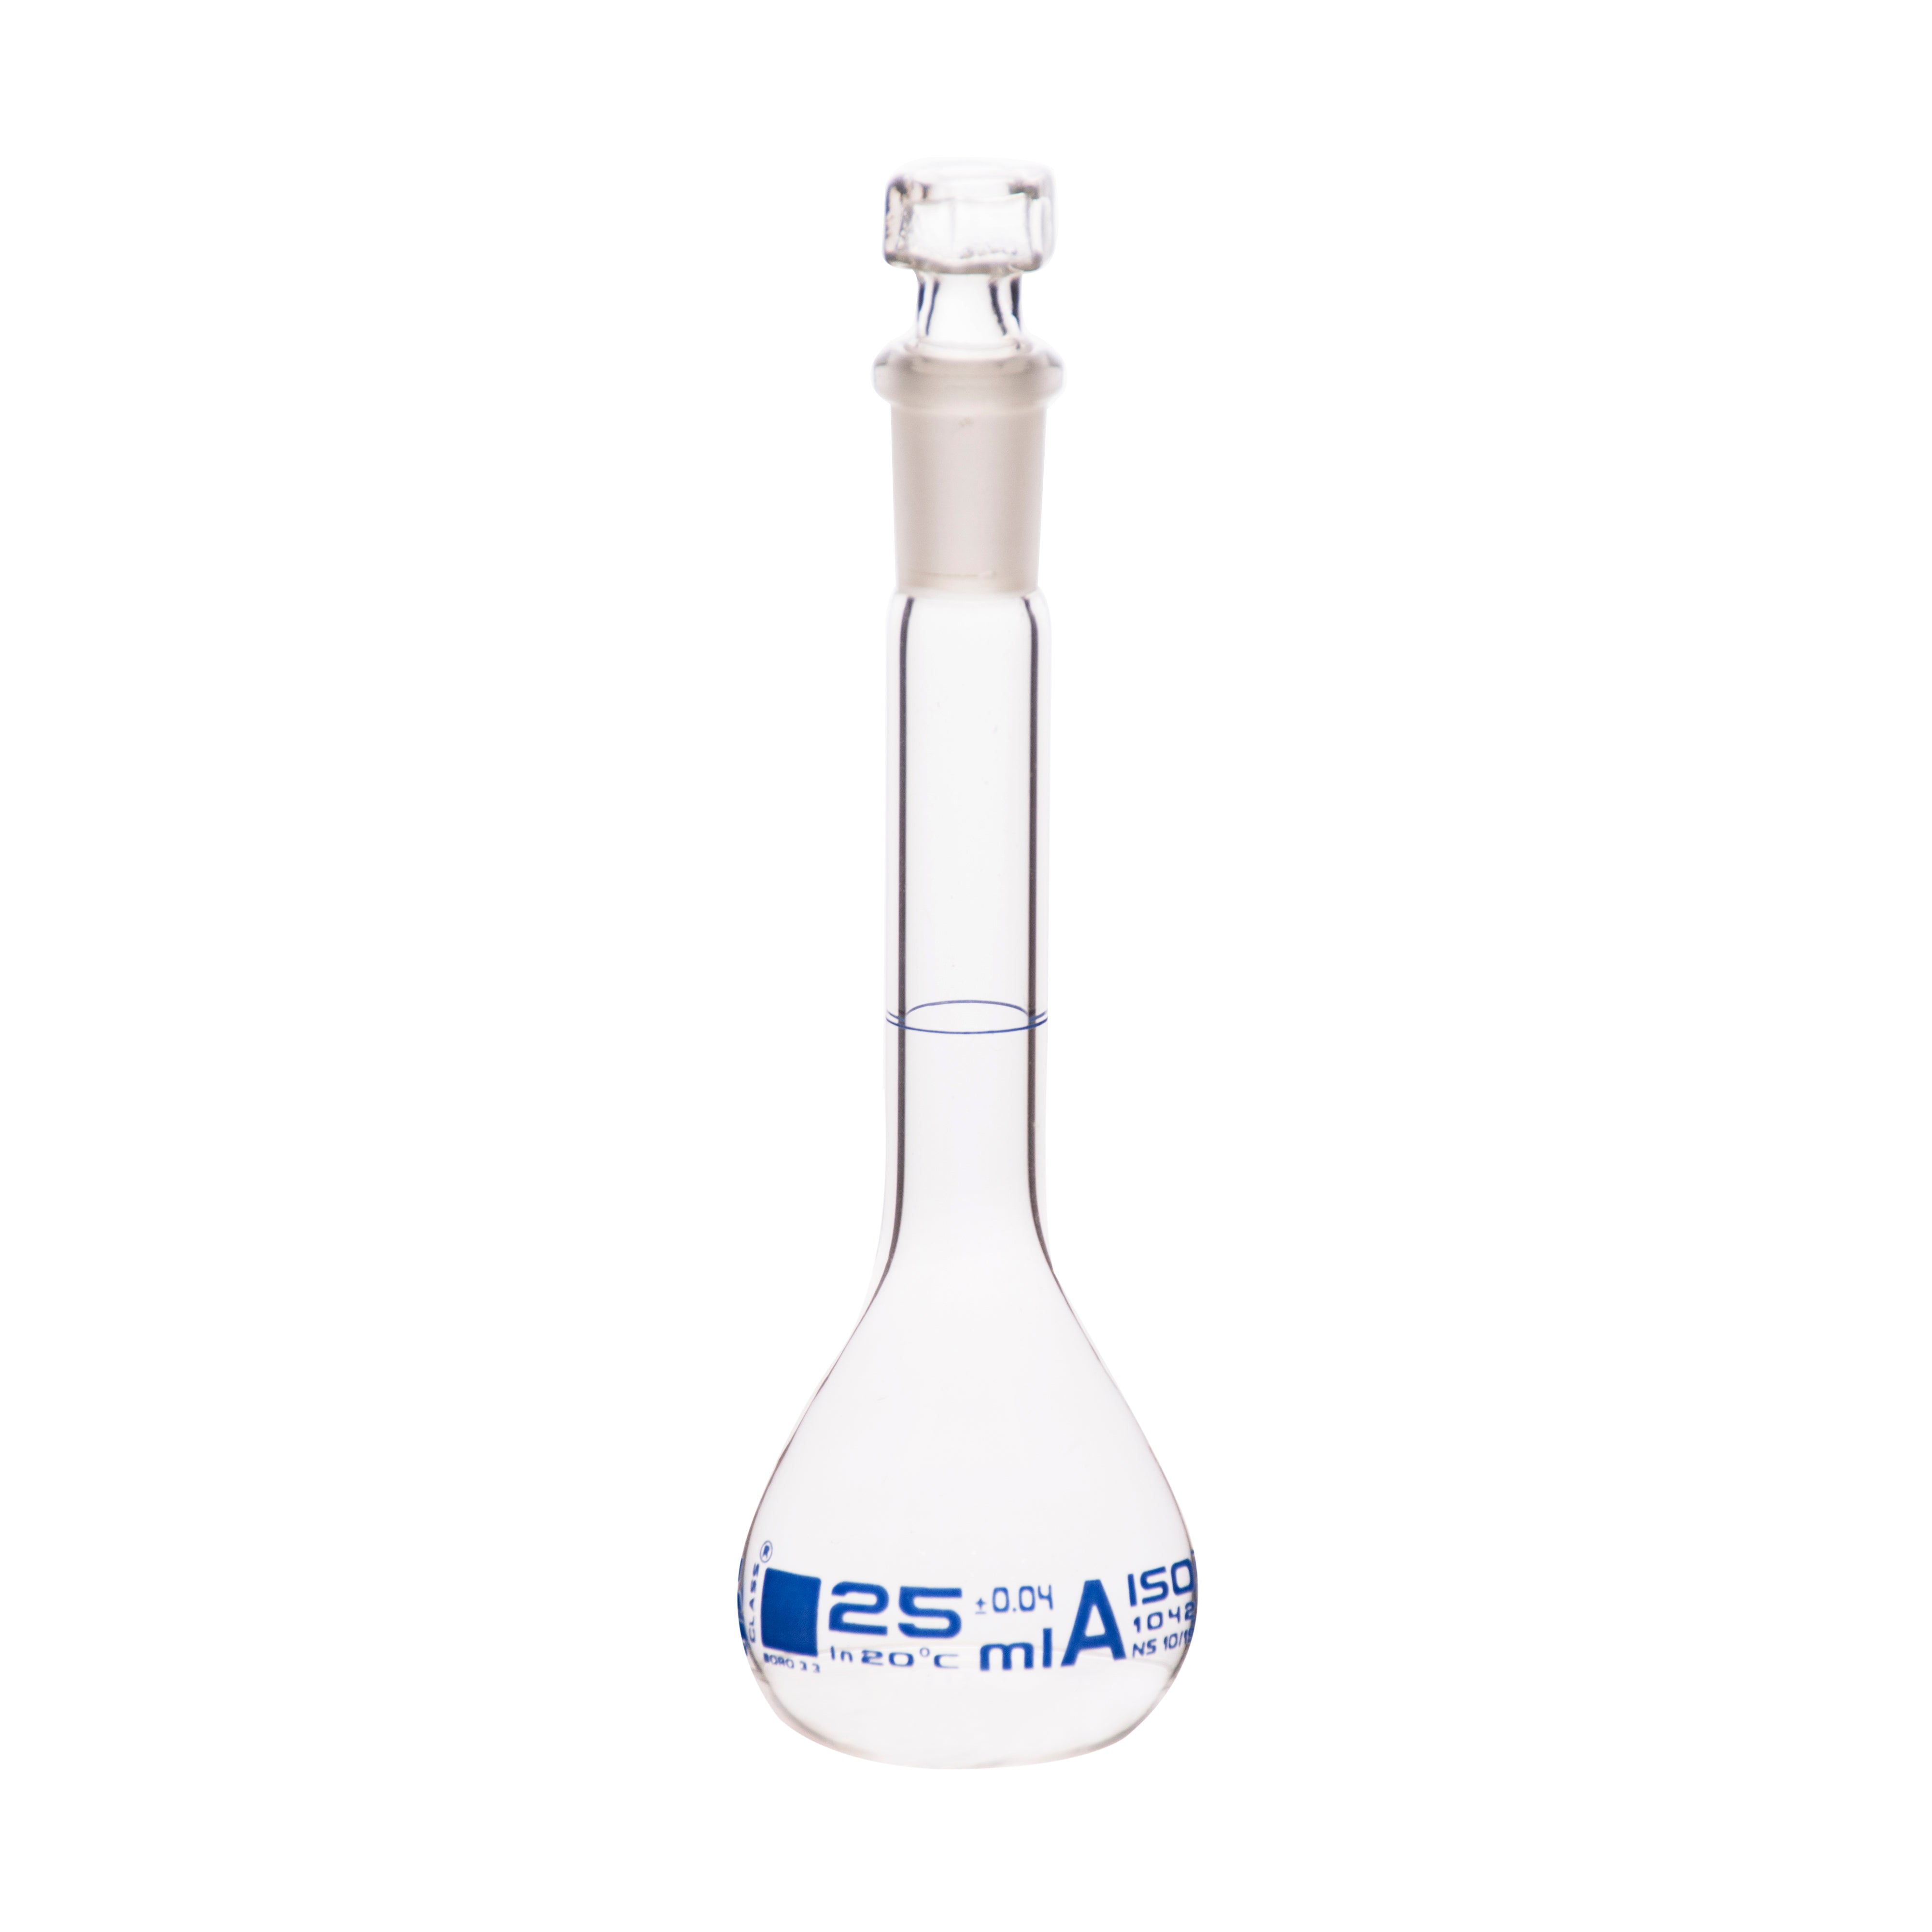 Borosilicate Volumetric Flask with Hollow Glass Stopper, 25ml, Class A, Blue Print, Autoclavable